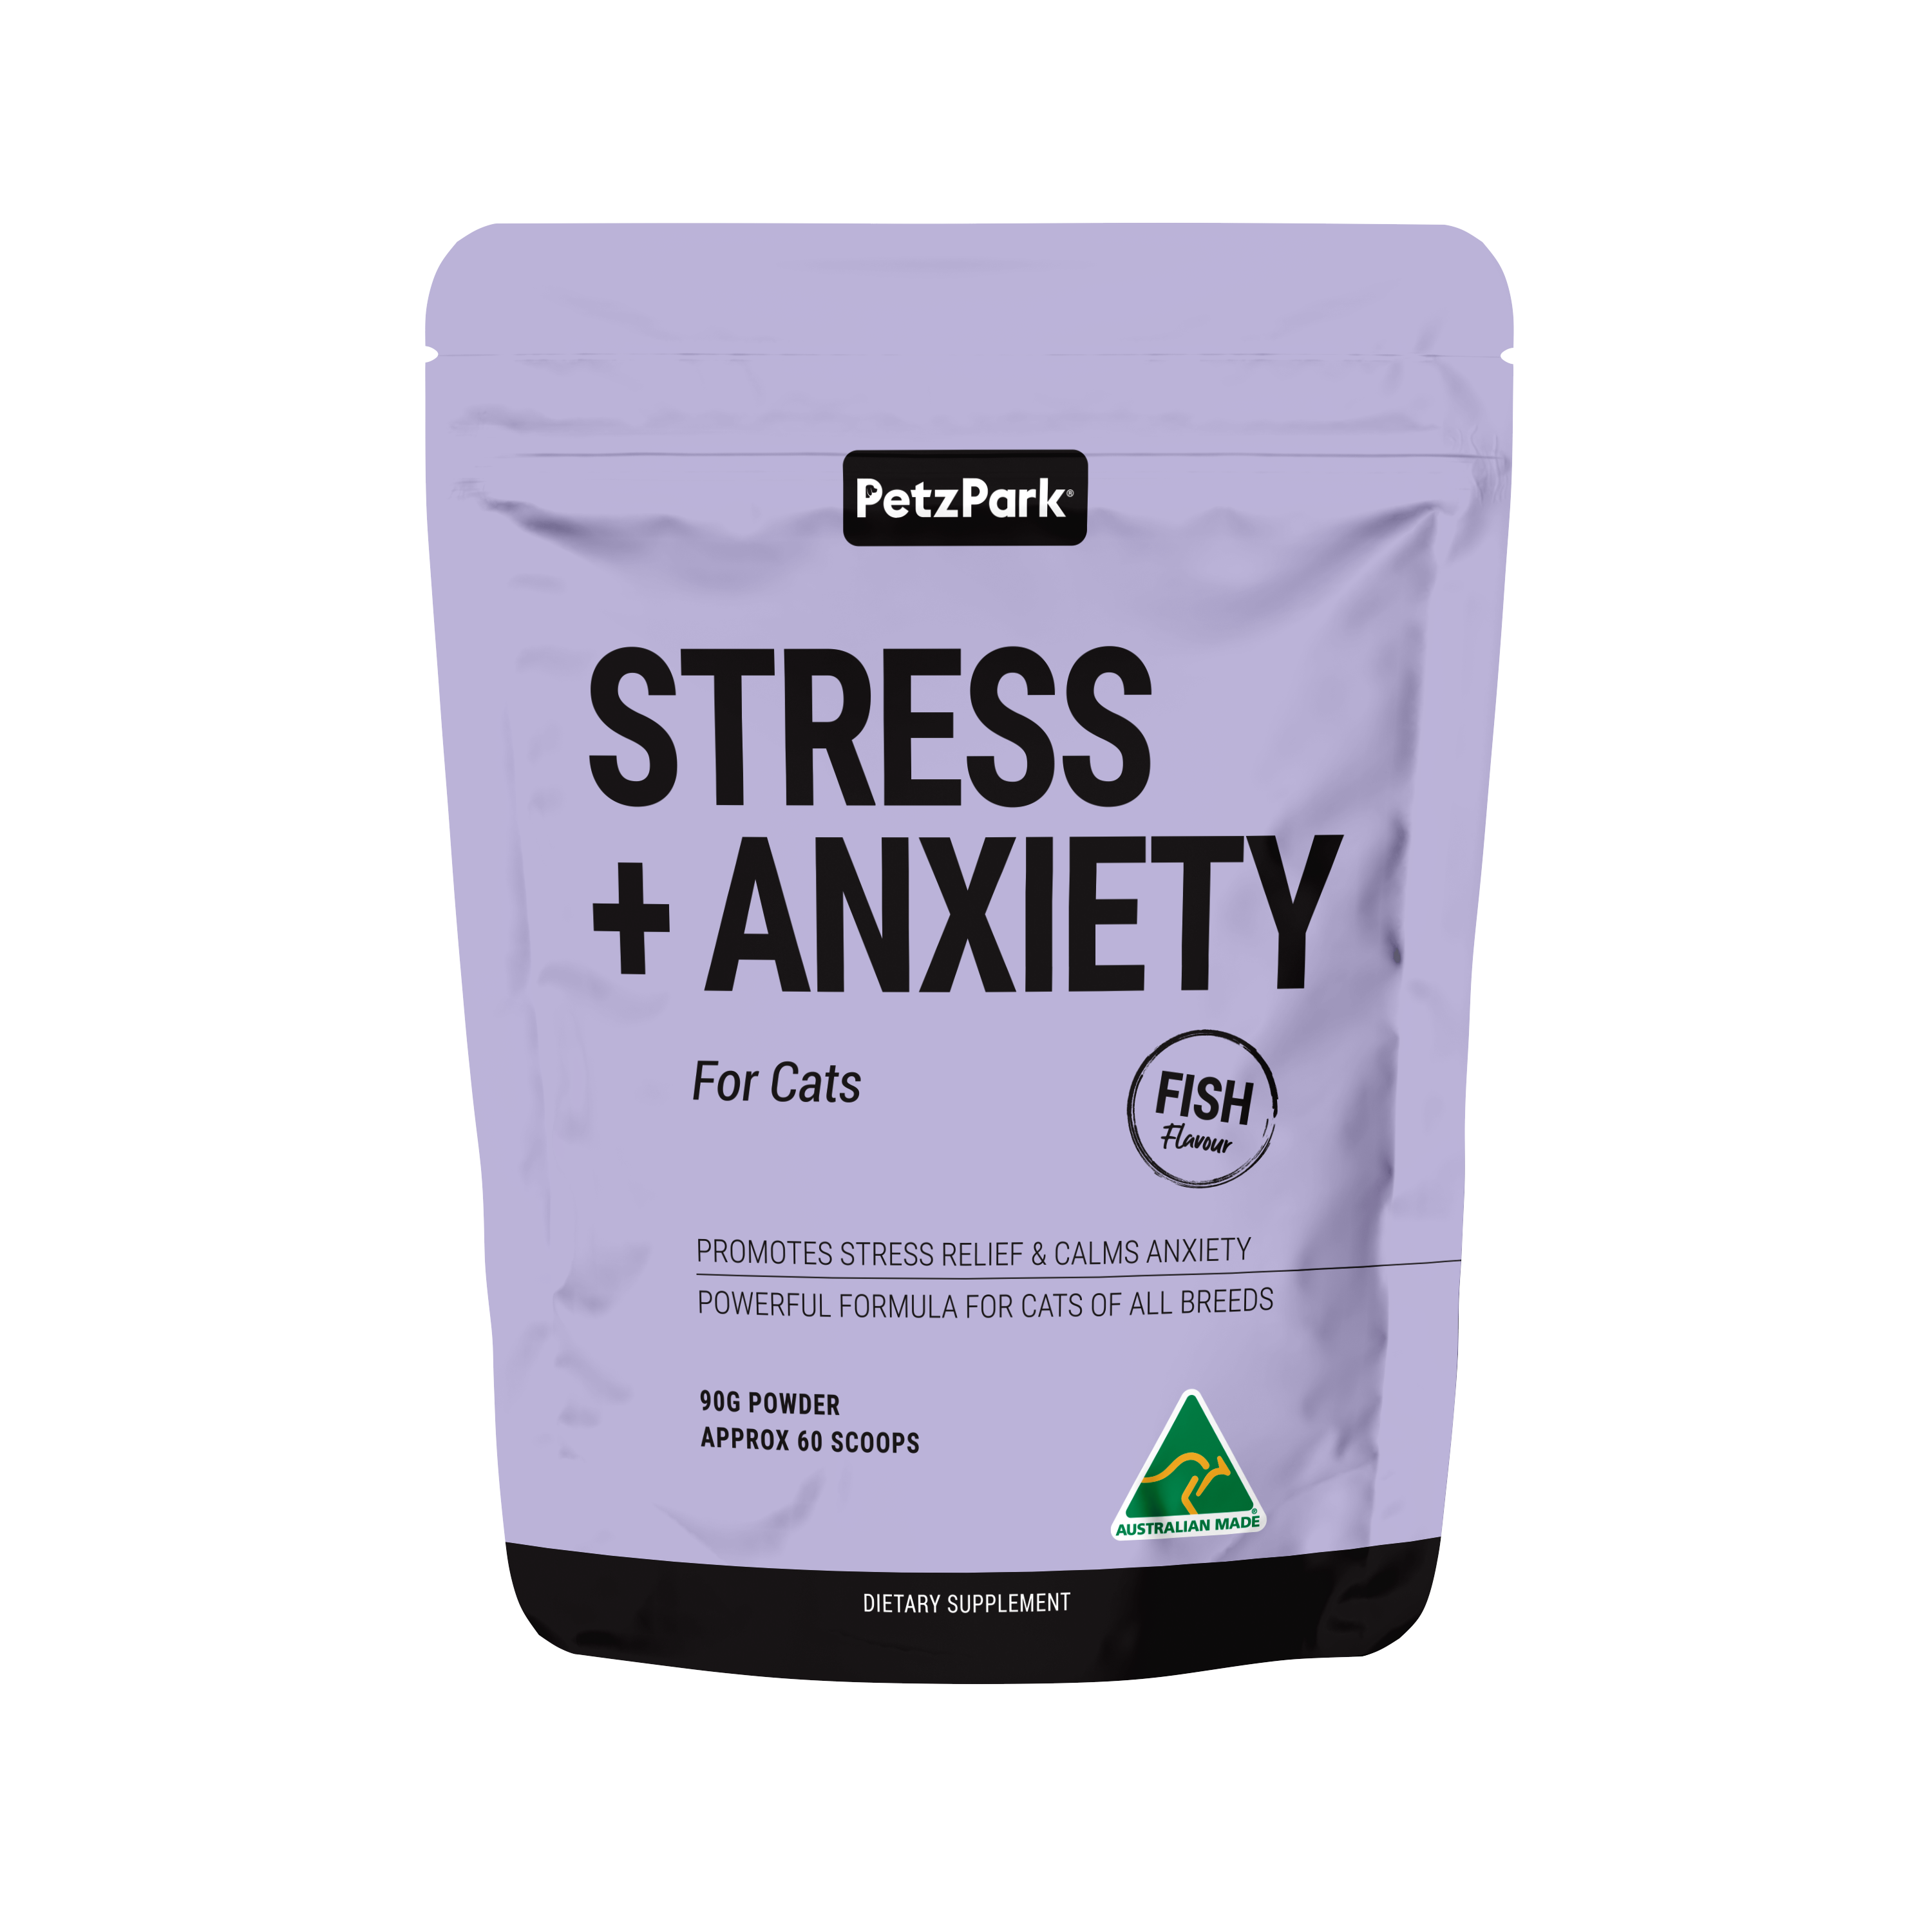 Petz Park Stress + Anxiety for Cats powder, catnip, valerian root, chamomile & more for calming anxiety & restful sleep